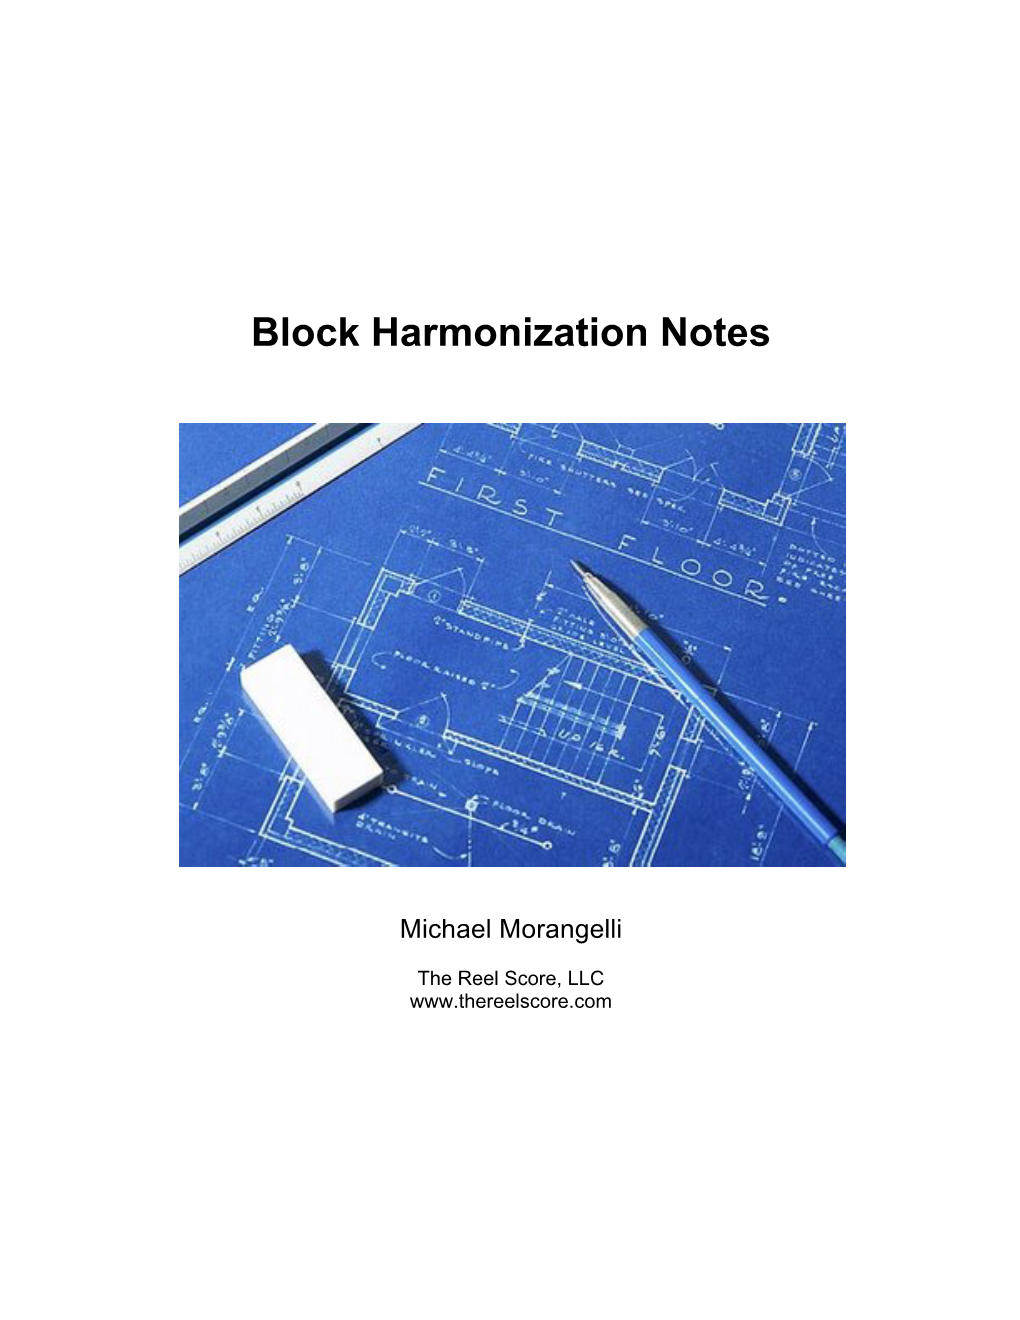 Introduction to Four Part Block Harmony